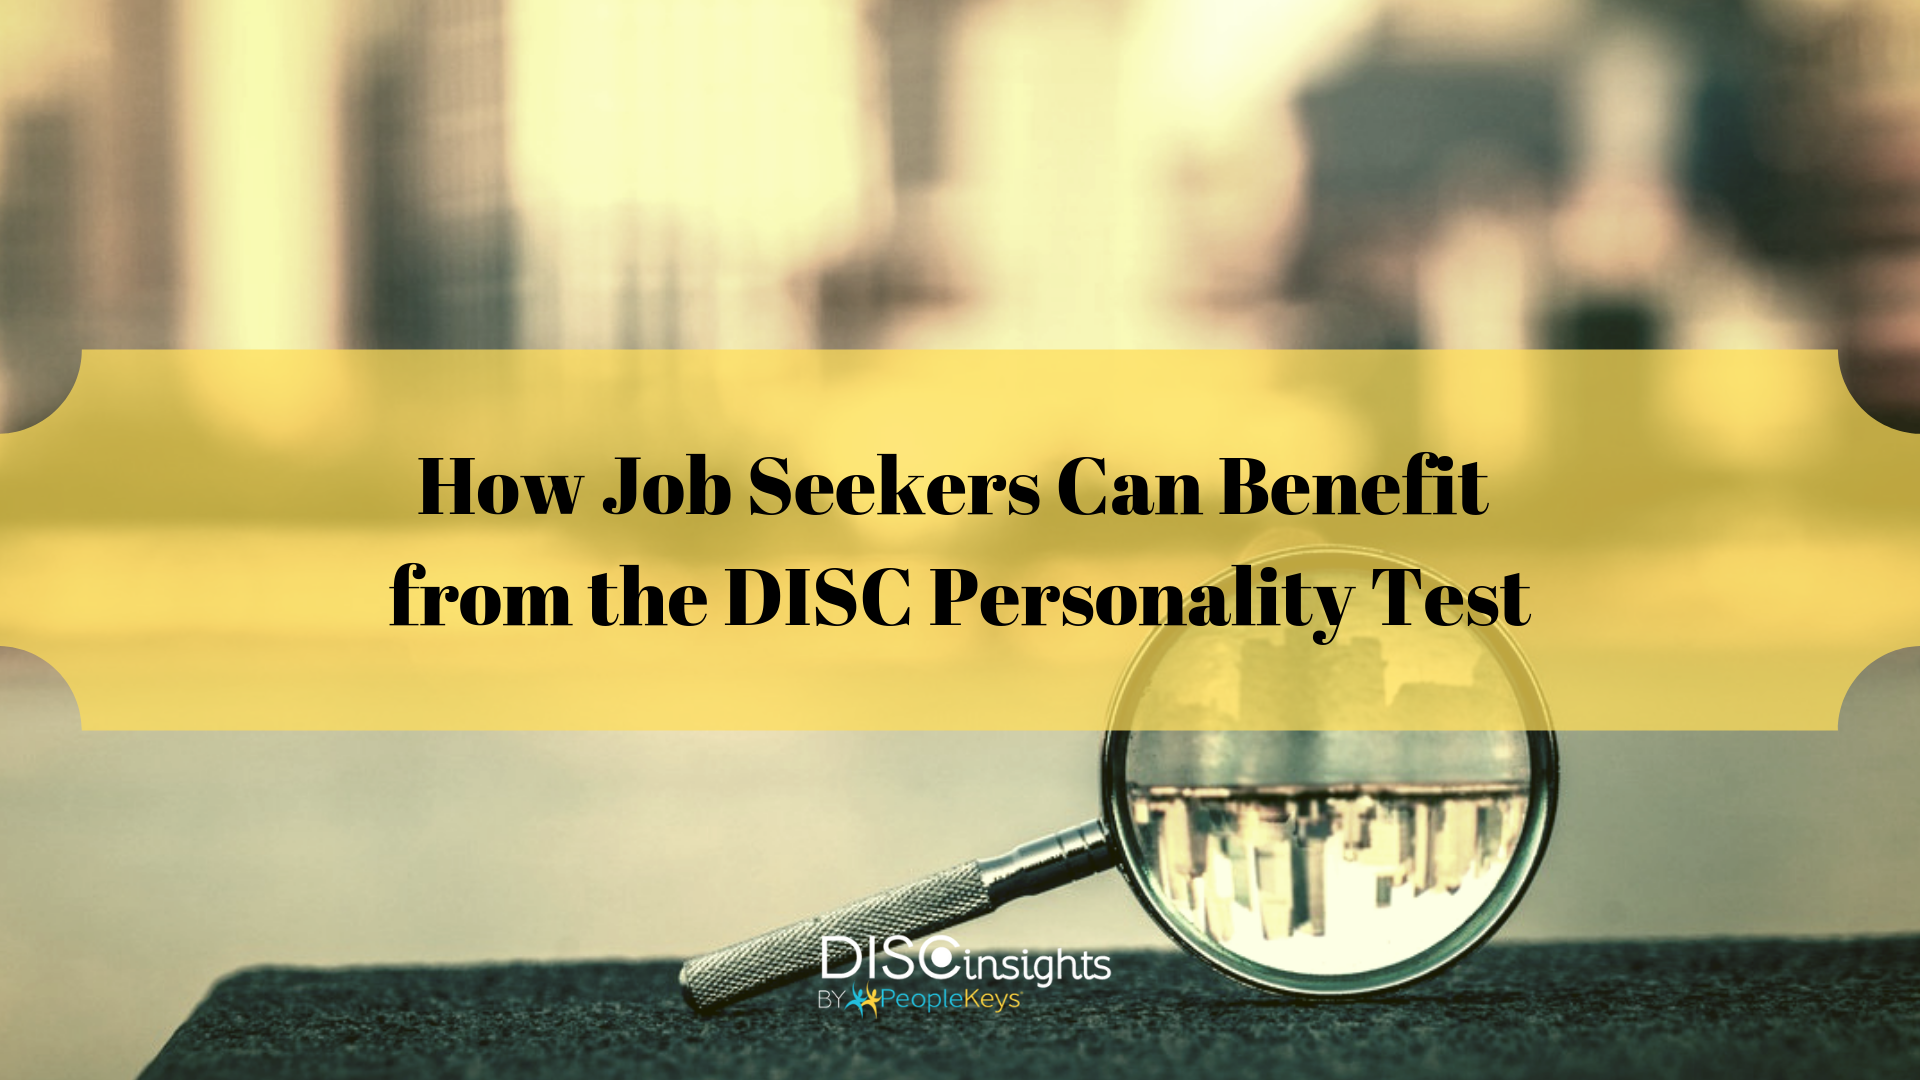 How Job Seekers Can Benefit from the DISC Personality Test